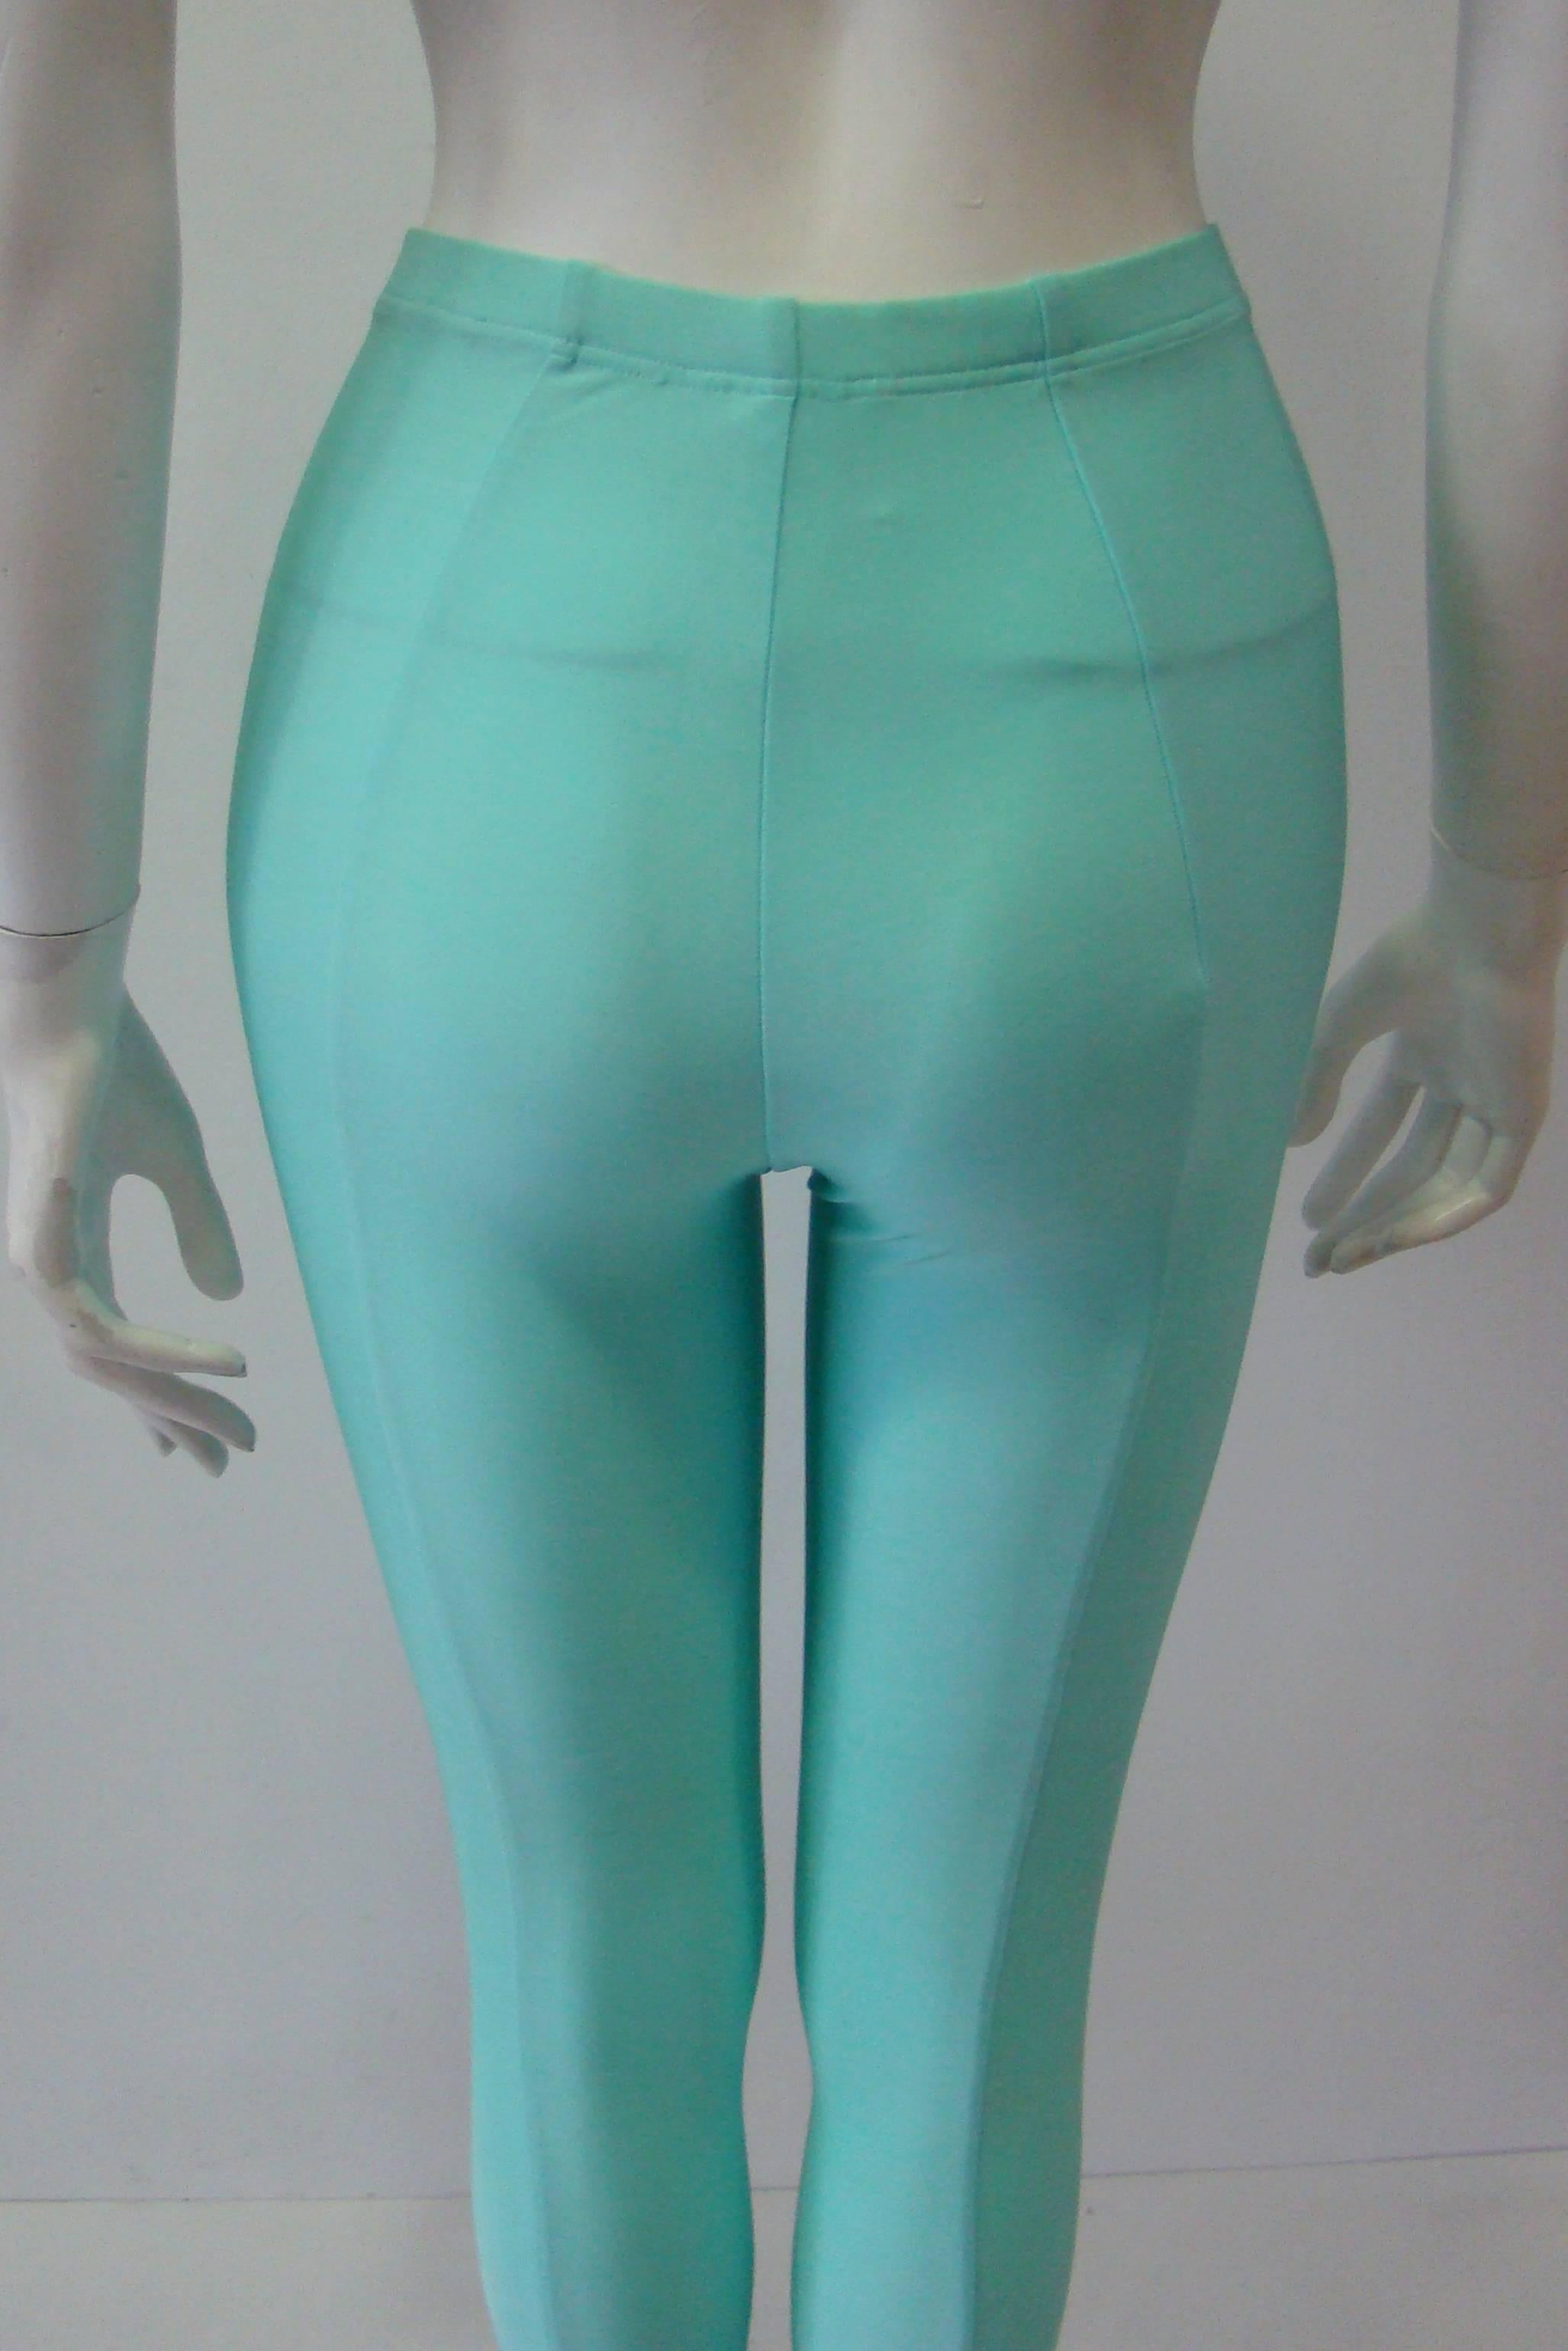 Gianni Versace Couture Turquoise Stretch Leggings For Sale 1